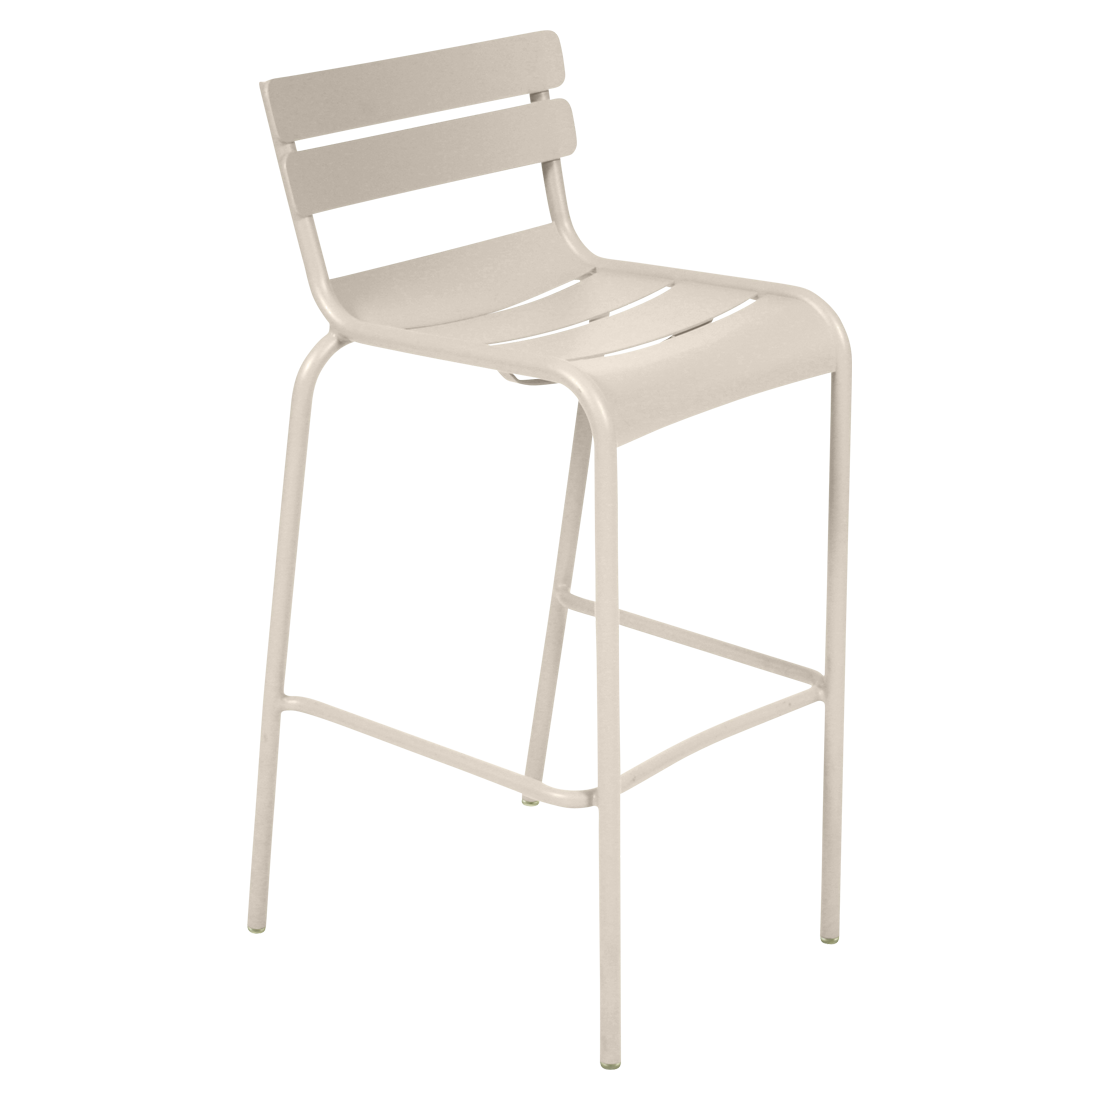 LUXEMBOURG / HIGH STOOL